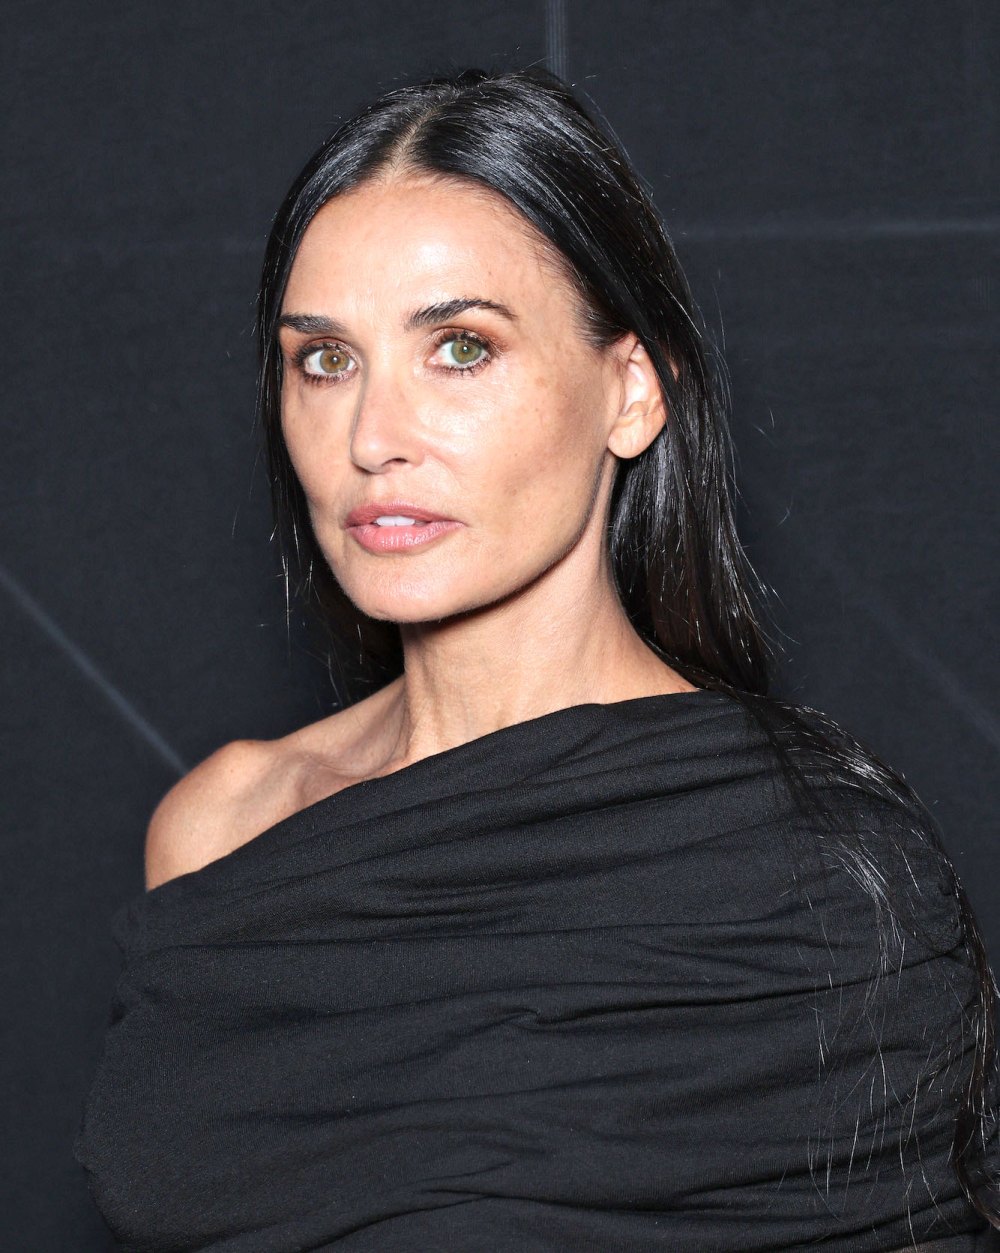 Demi Moore Sends Message to Families Struggling With Dementia